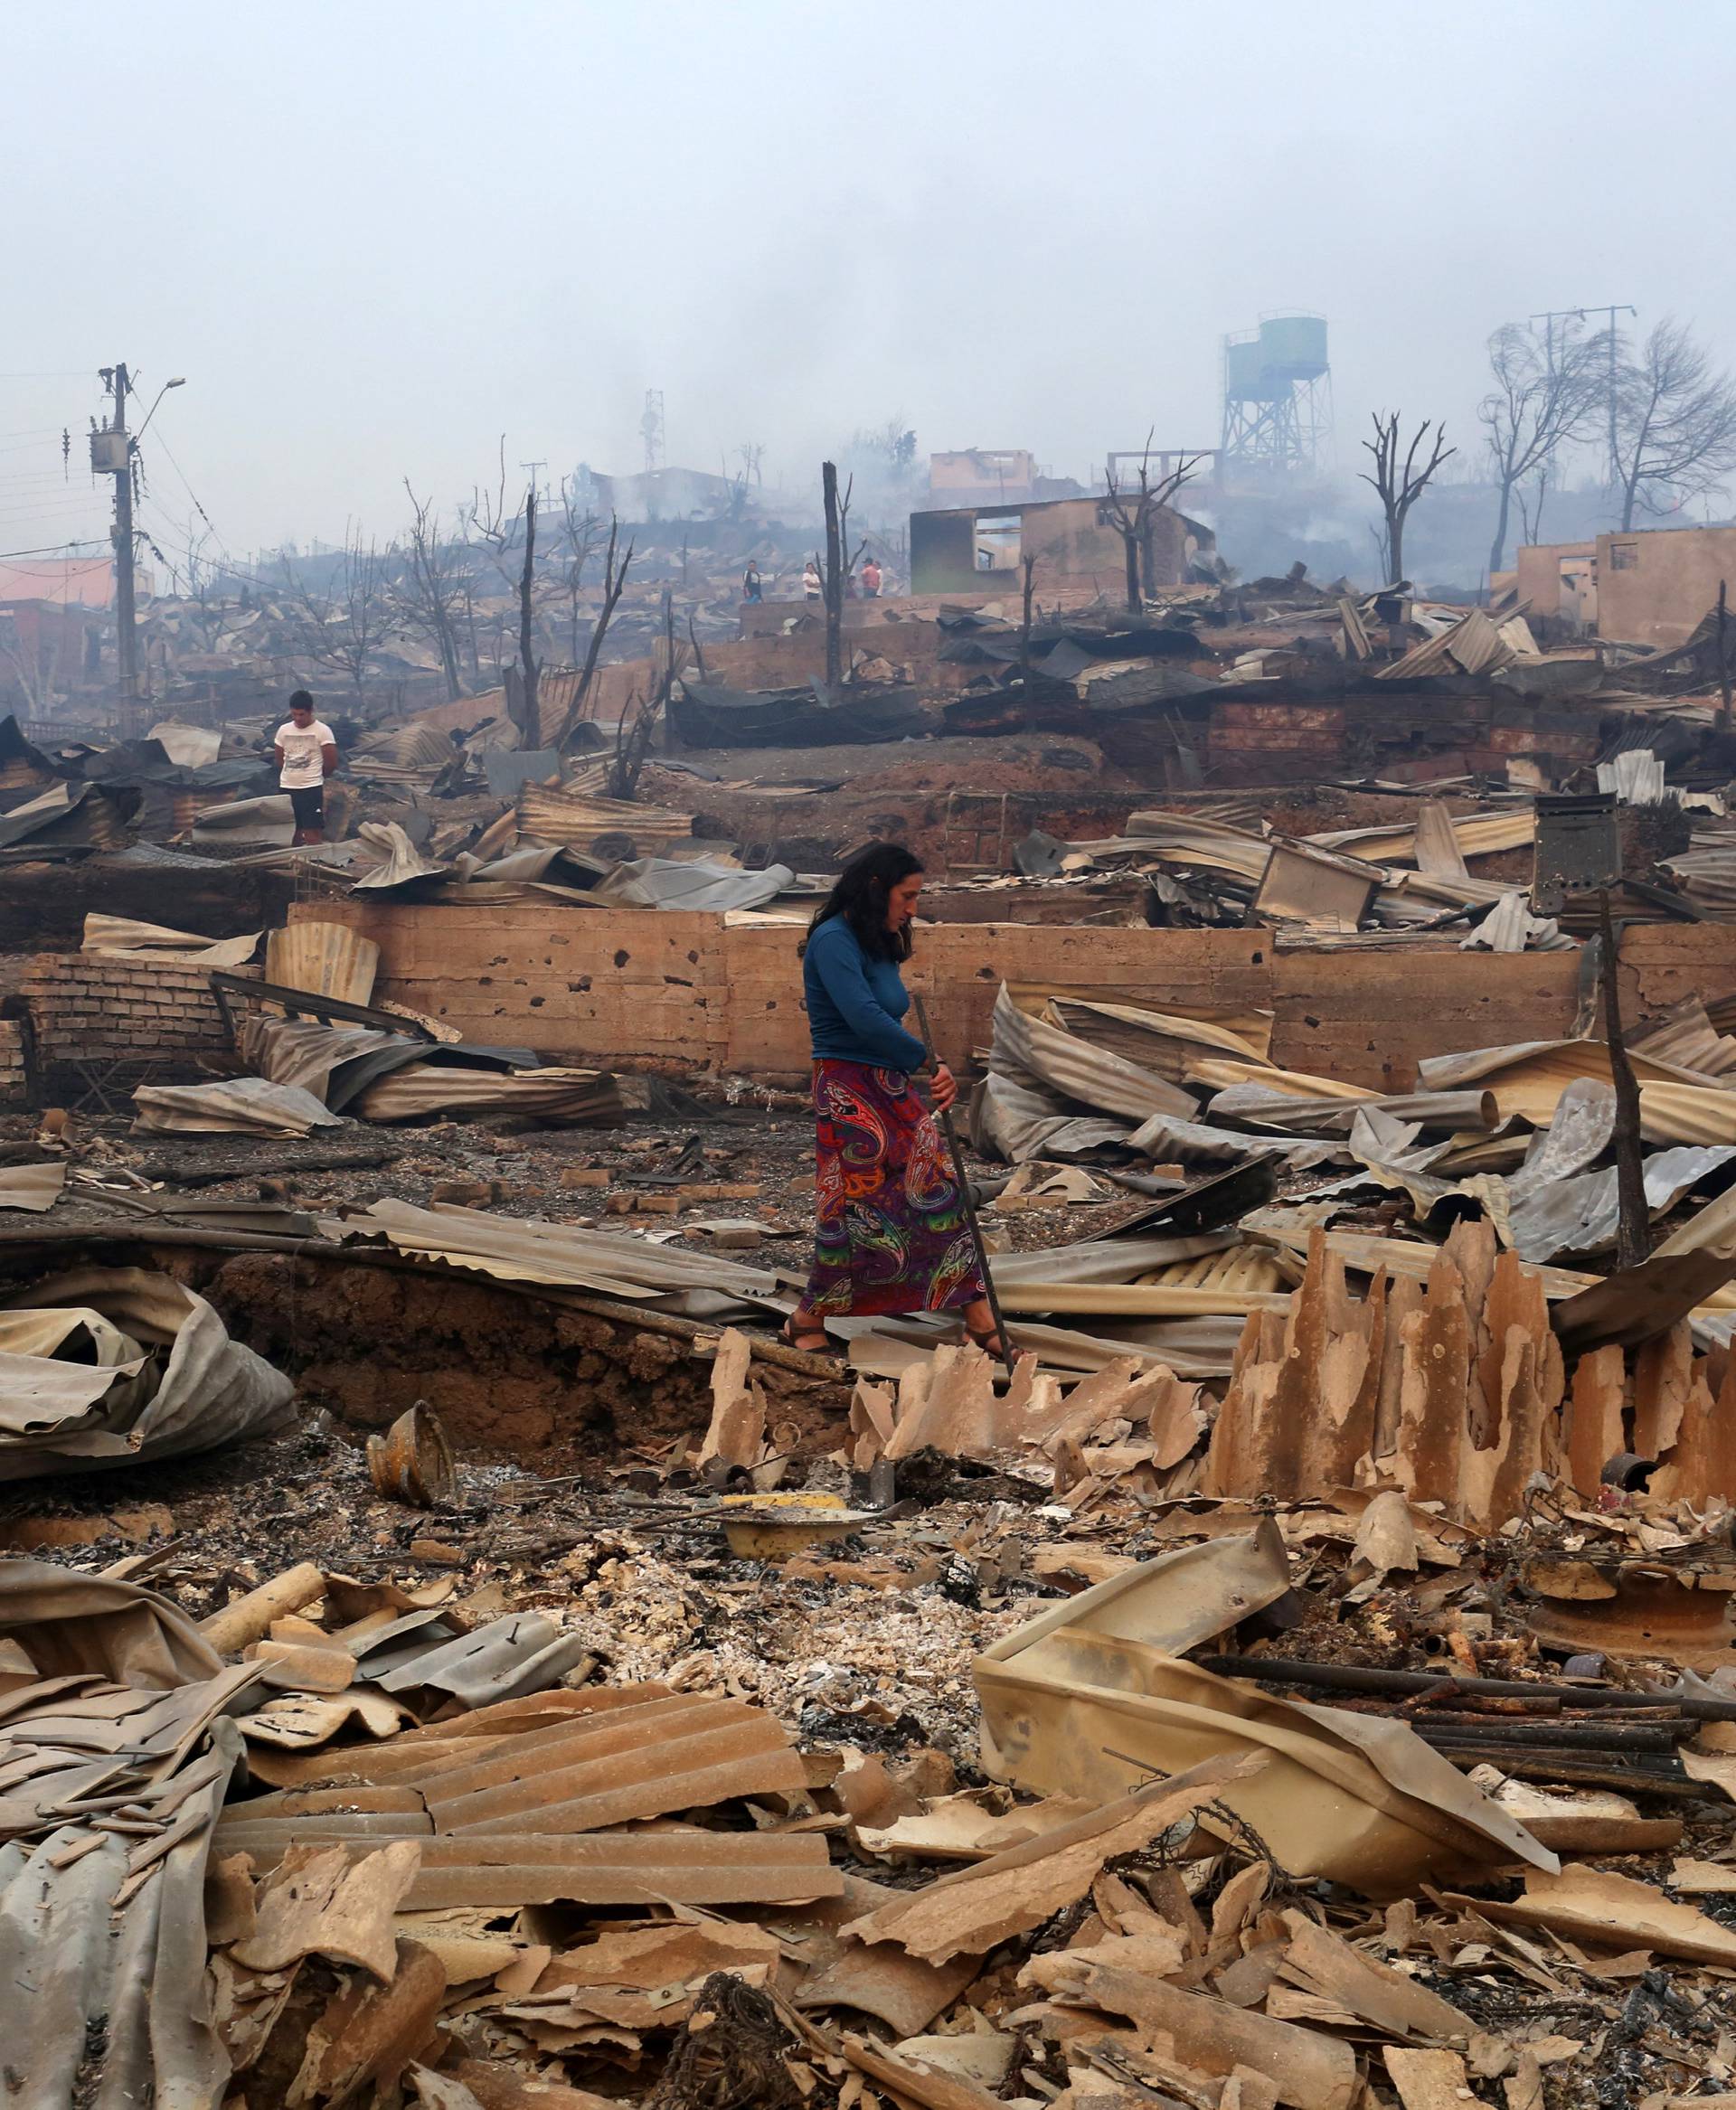 A woman walks through the remains of burnt houses as the worst wildfires in Chile's modern history ravage wide swaths of the country's central-south regions, in Santa Olga